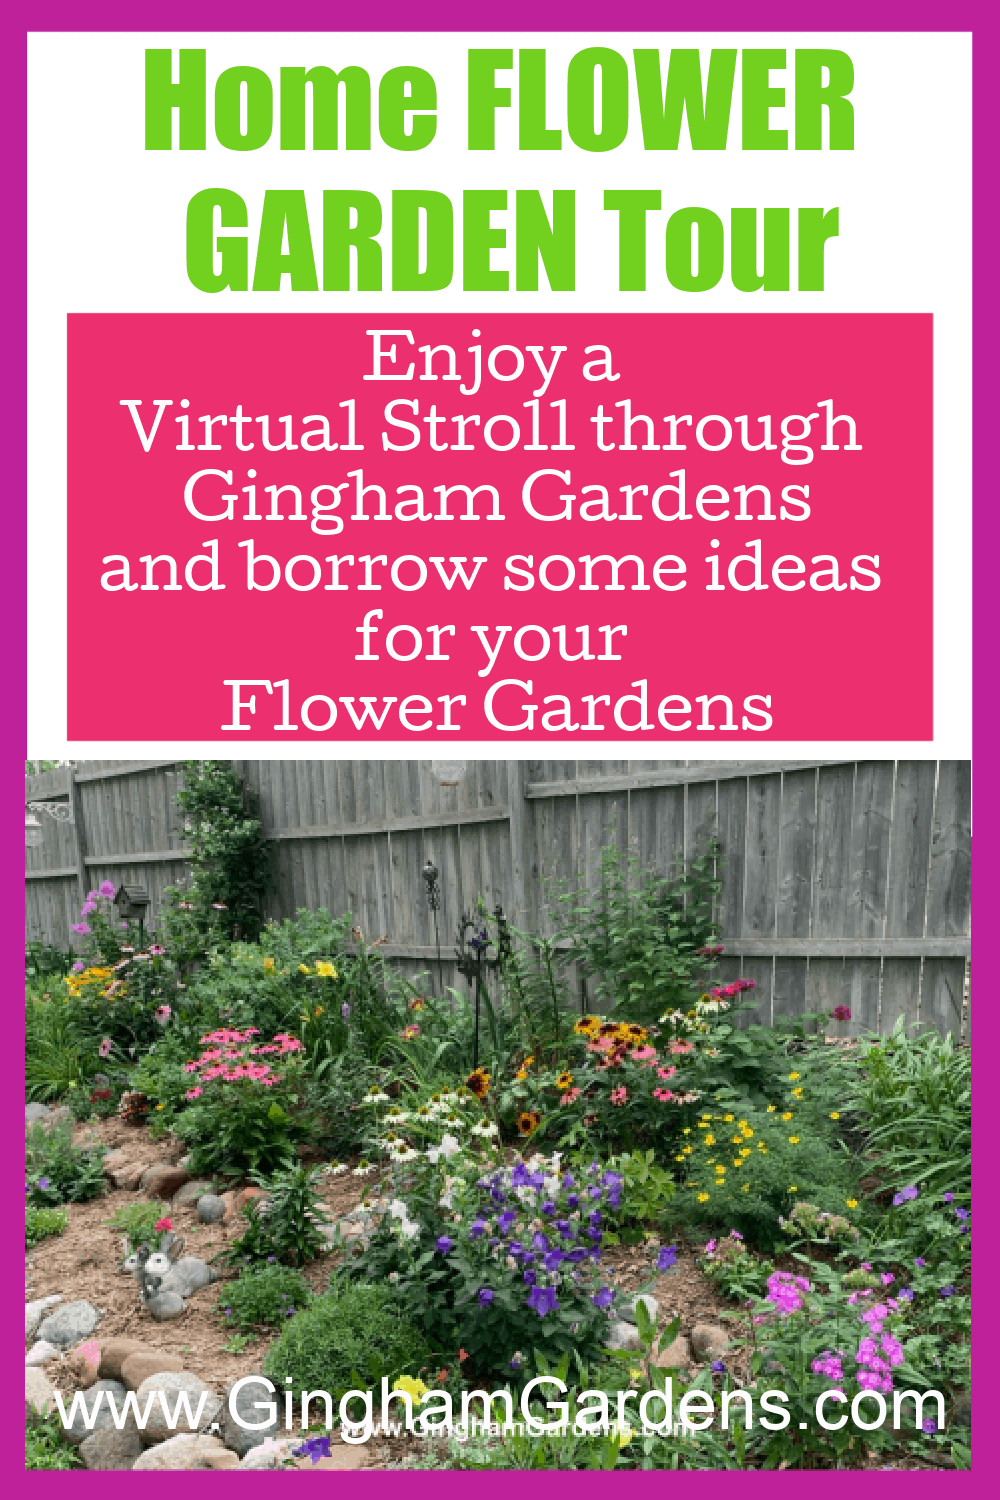 Image of a Flower Garden with text overlay - Home Flower Garden Tour